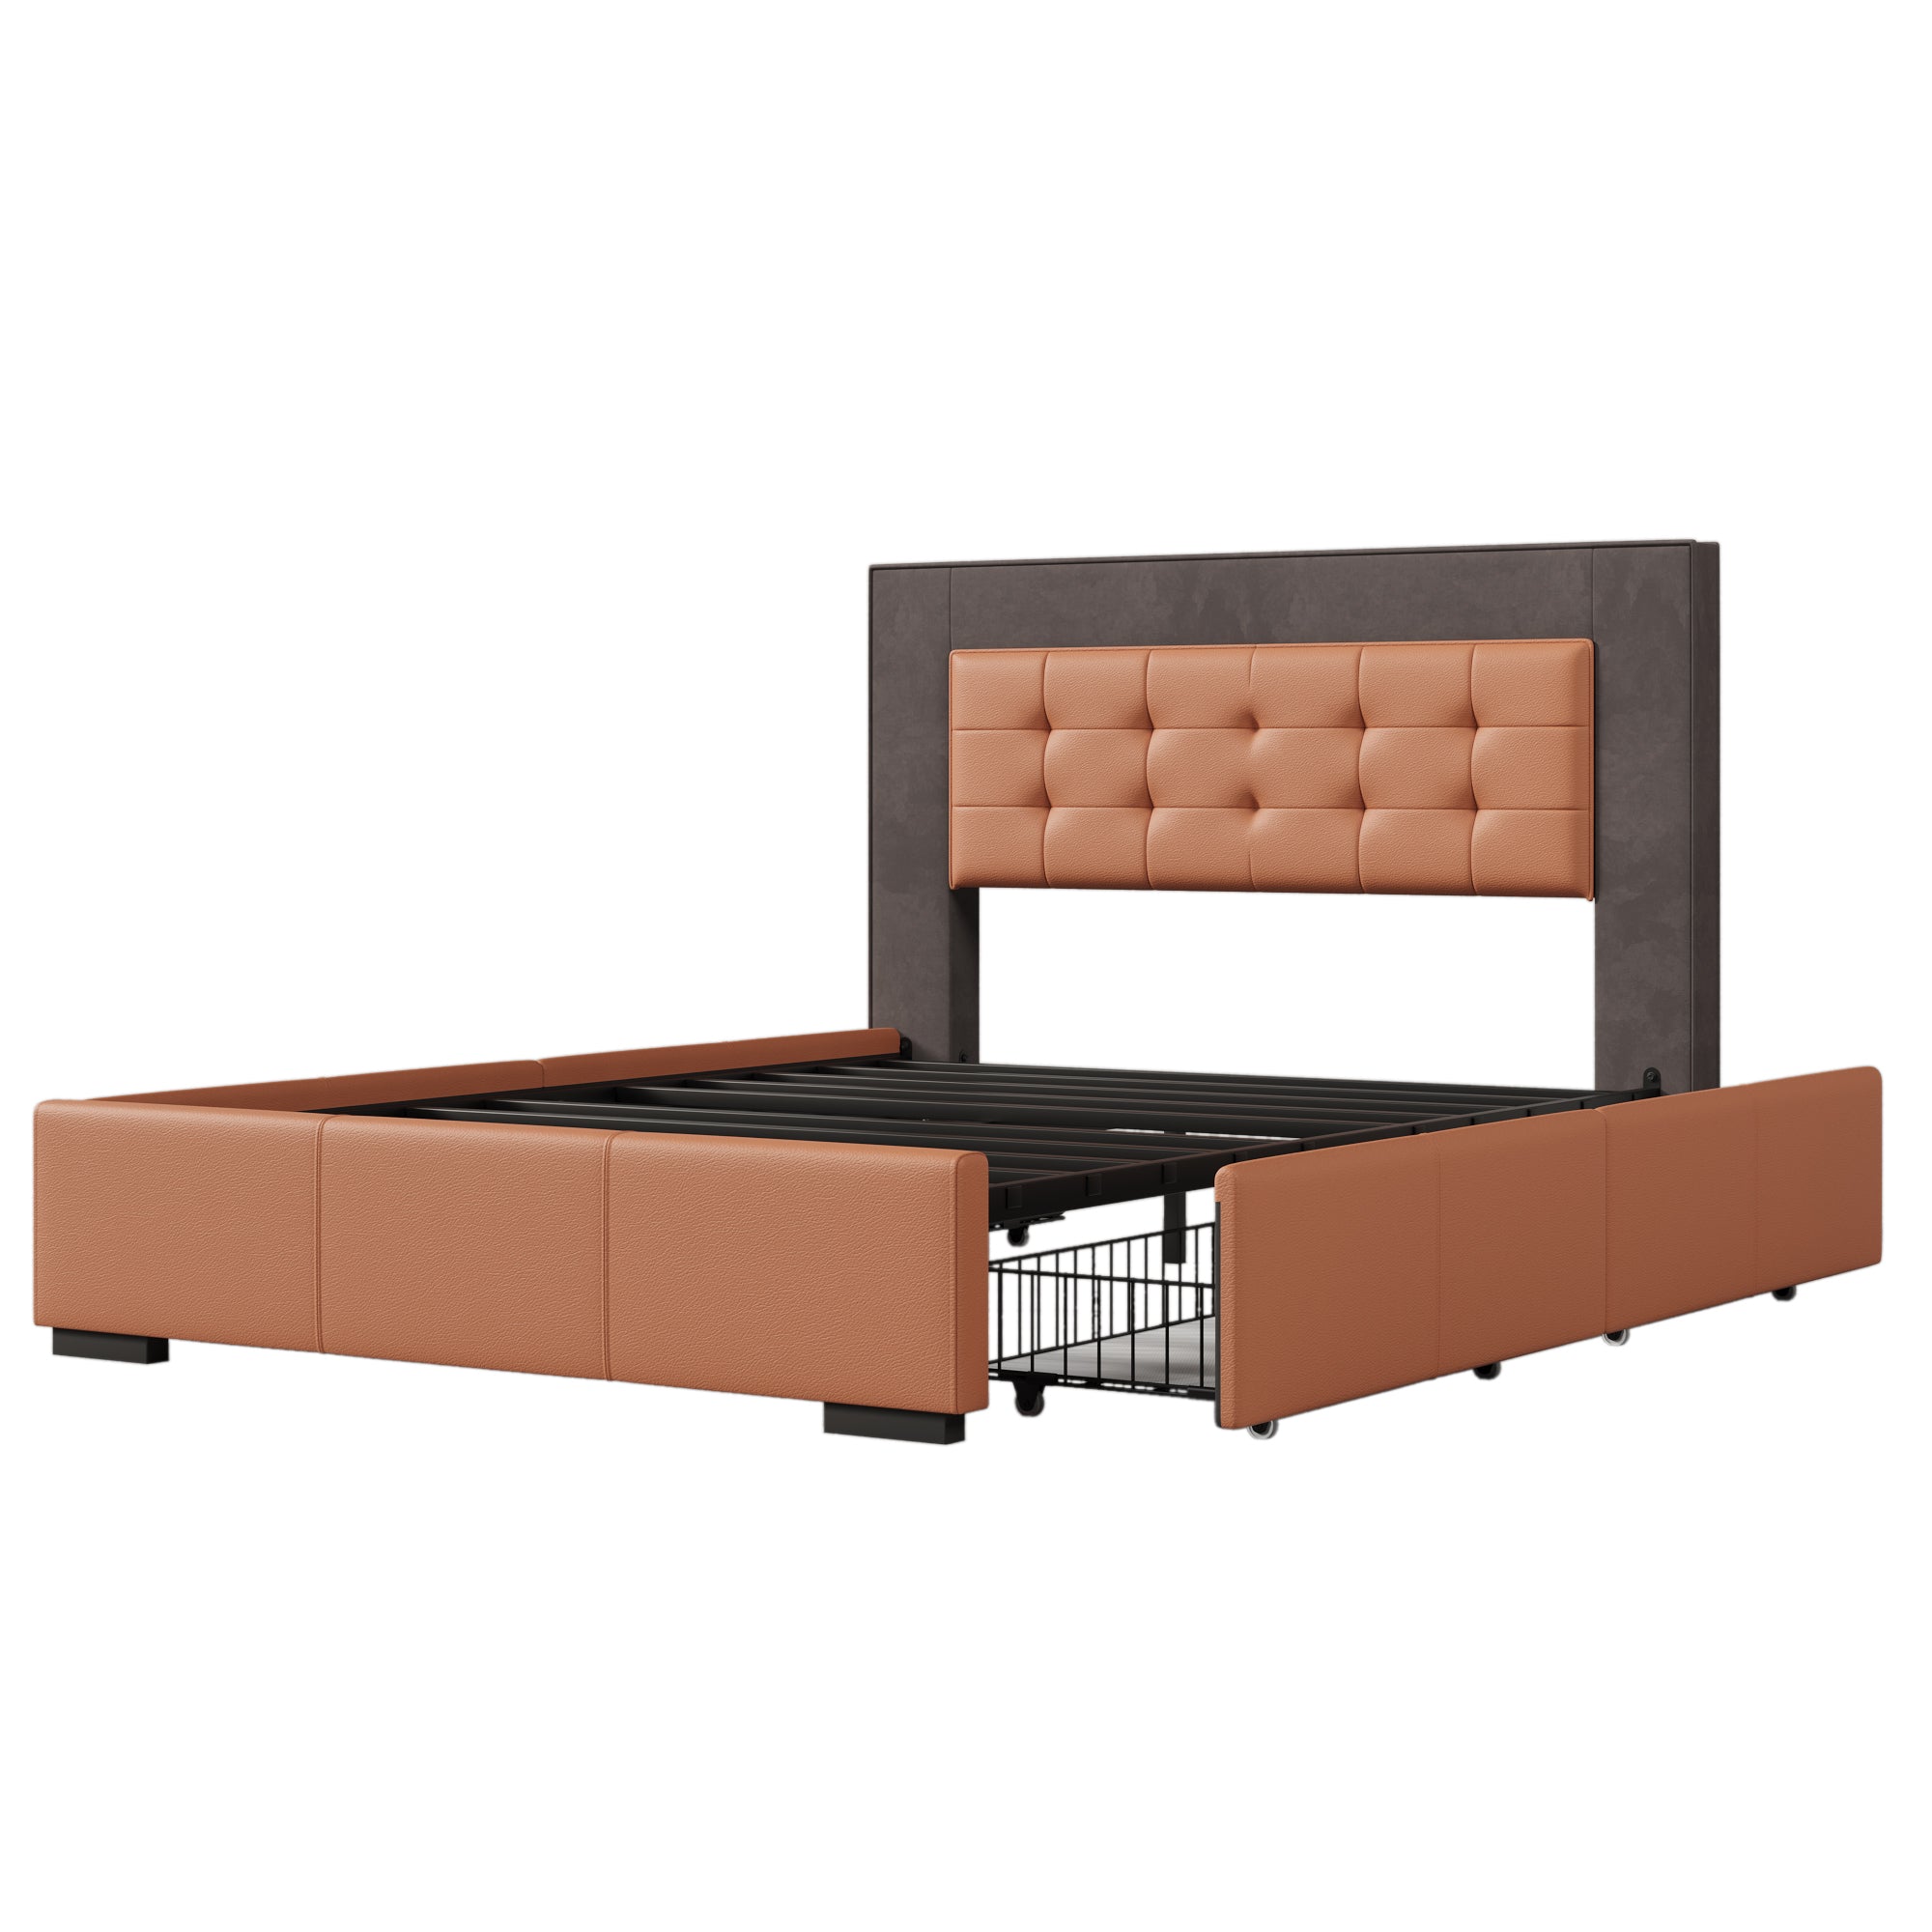 Modern Style Upholstered Queen Platform Bed Frame with box spring not required-queen-orange+dark